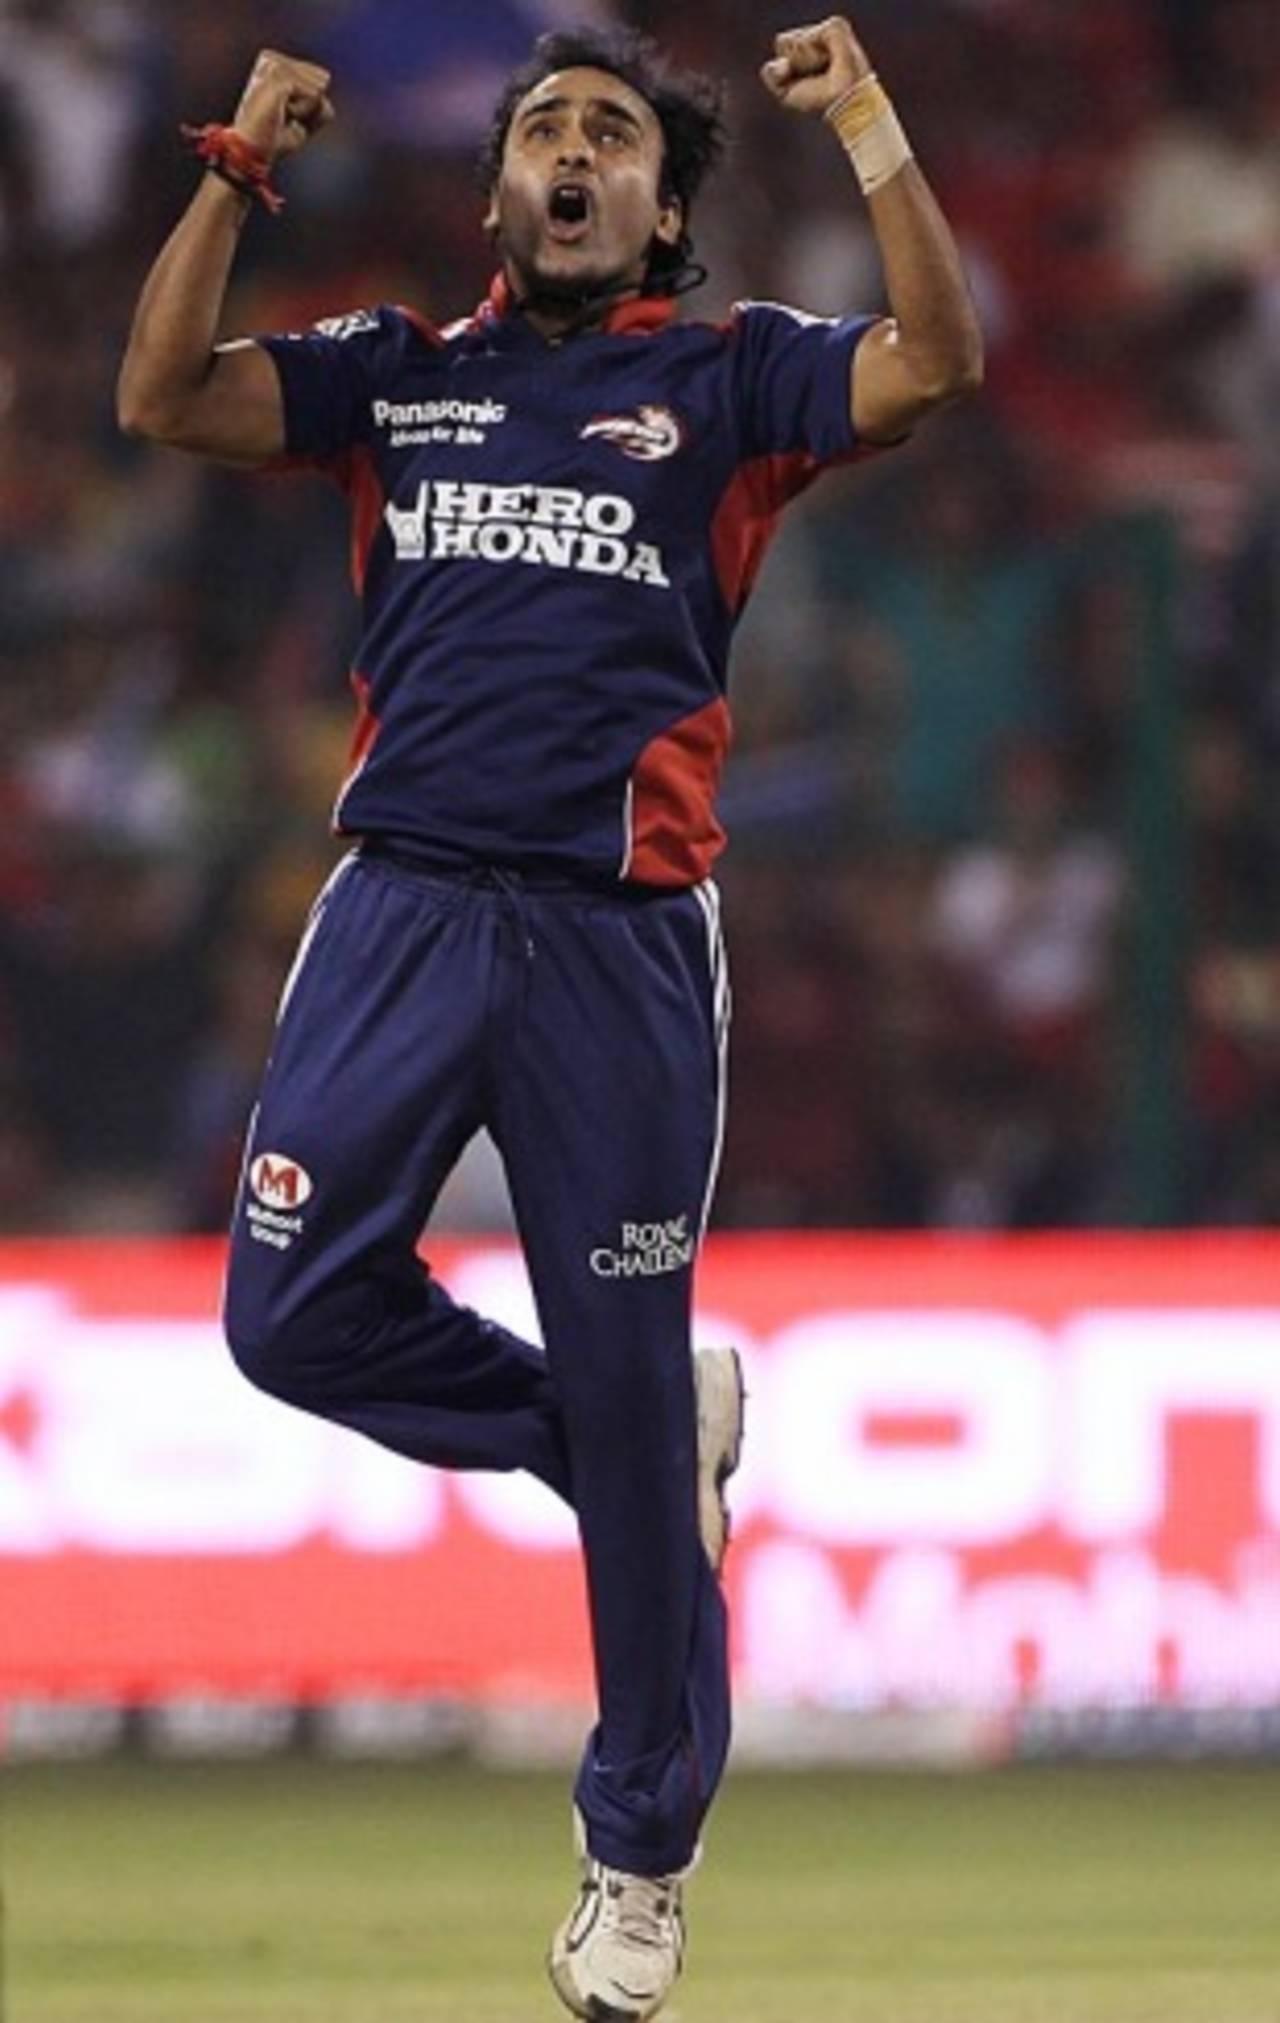 Amit Mishra bagged two crucial wickets to restrict Royal Challengers Bangalore in their chase, Royal Challengers Bangalore v Delhi Daredevils, IPL, Bangalore, March 25, 2010